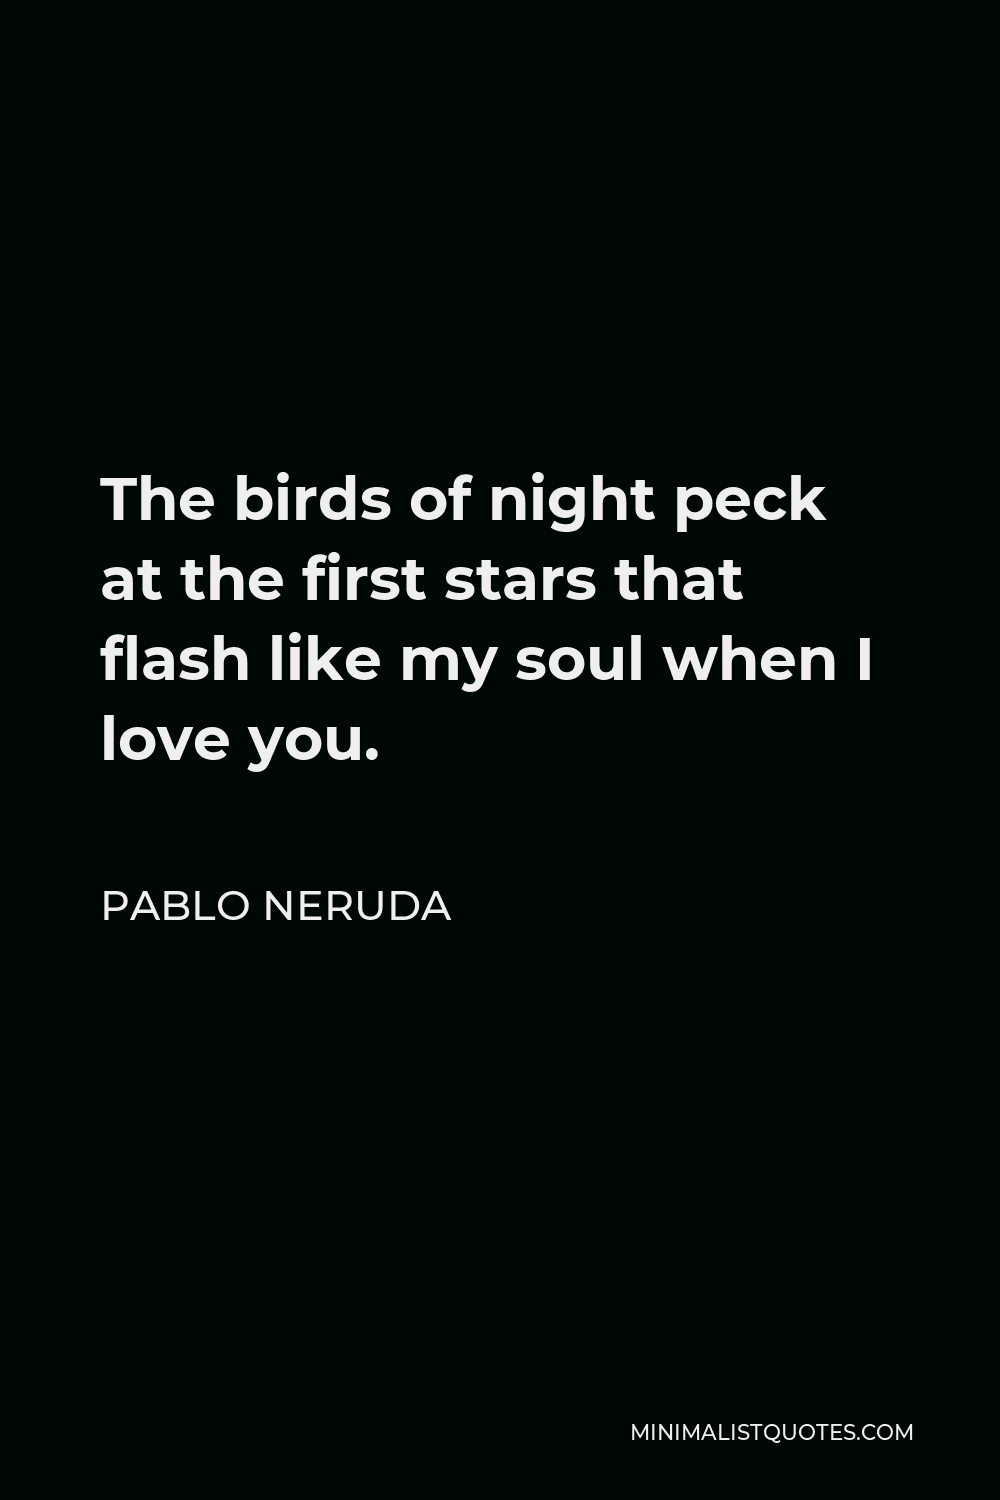 Pablo Neruda Quote - The birds of night peck at the first stars that flash like my soul when I love you.